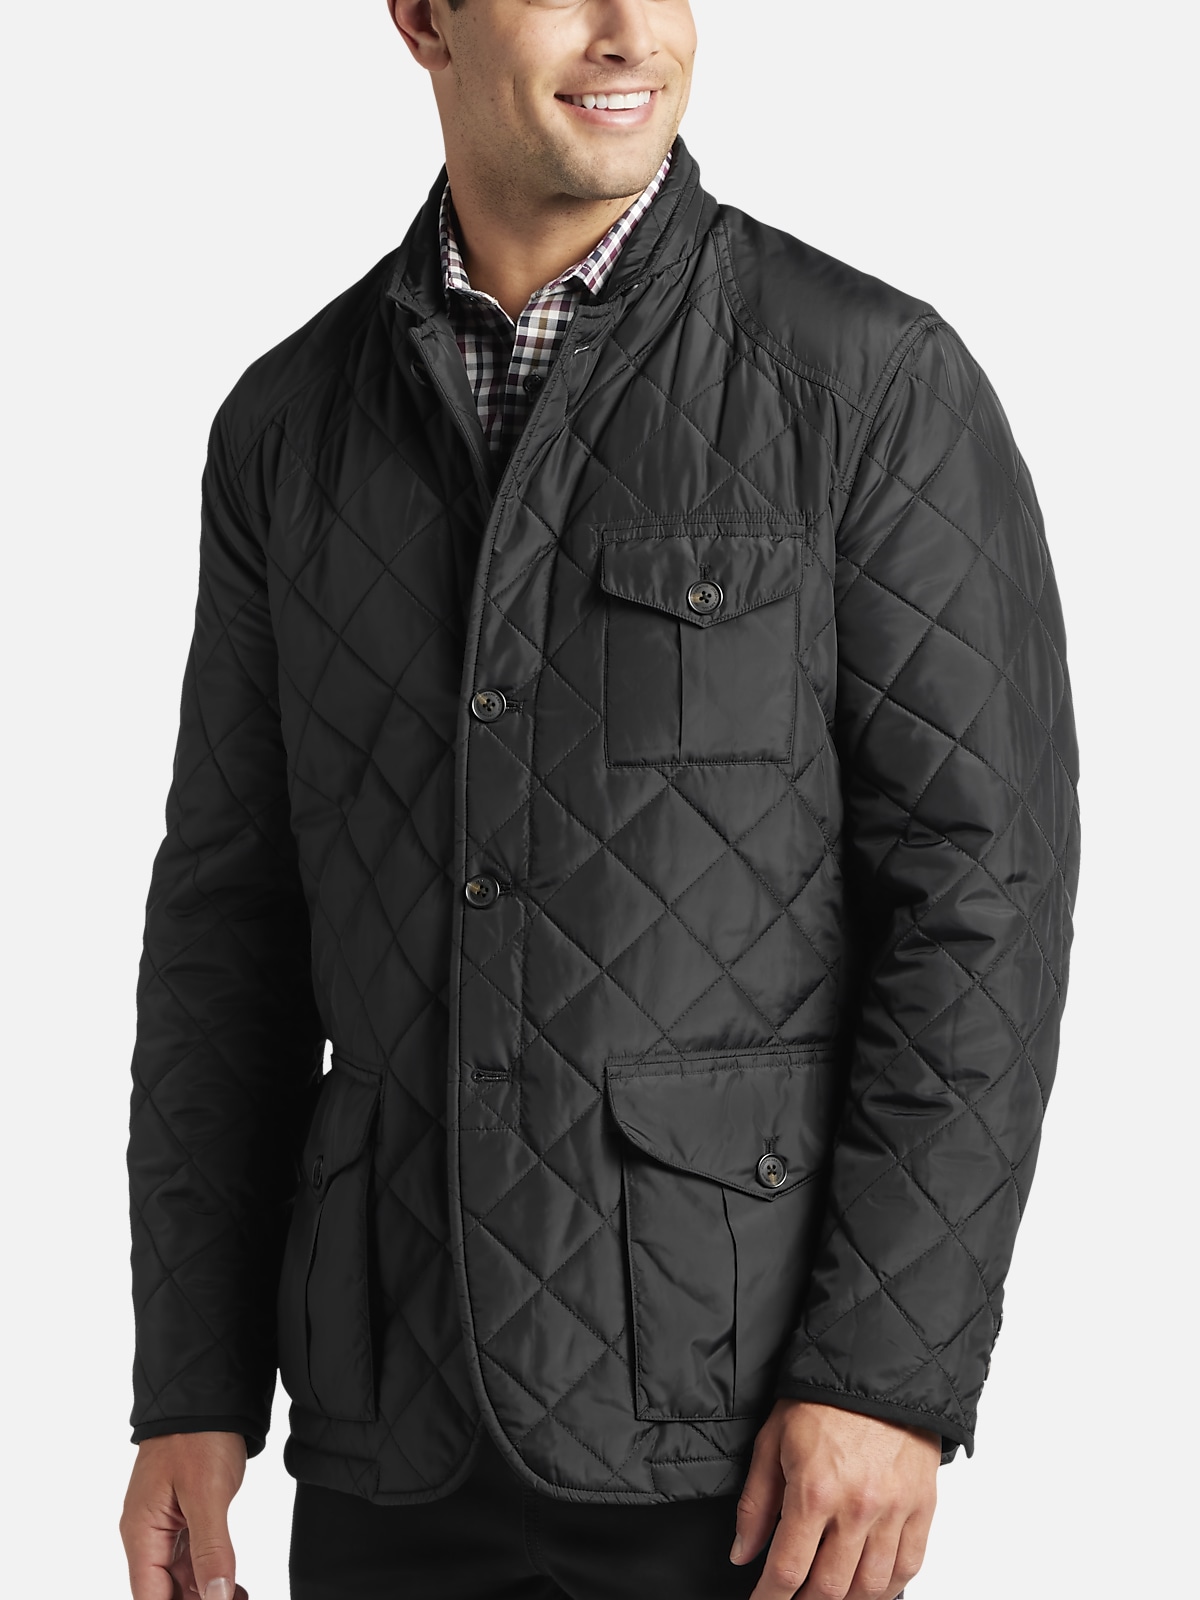 Joseph Abboud Modern Fit Quilted Hunting Jacket | All Sale| Men's